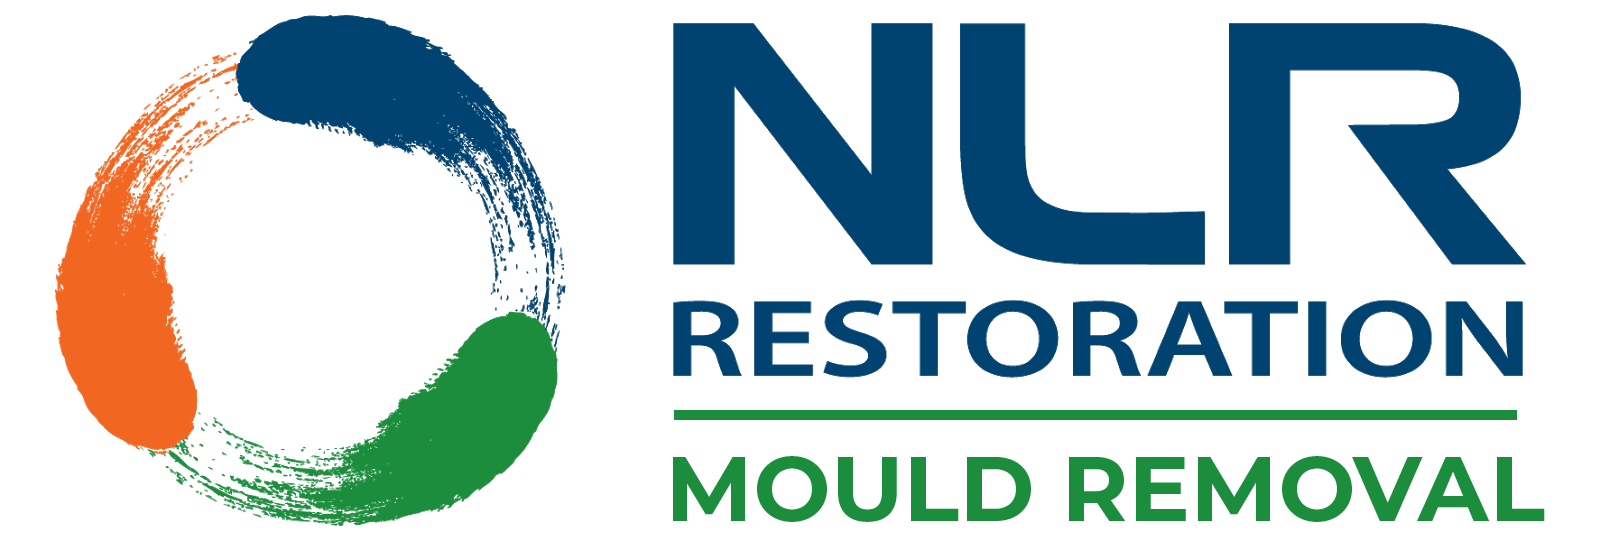 NLR Mould Removal | Industry-Leading Mould Services